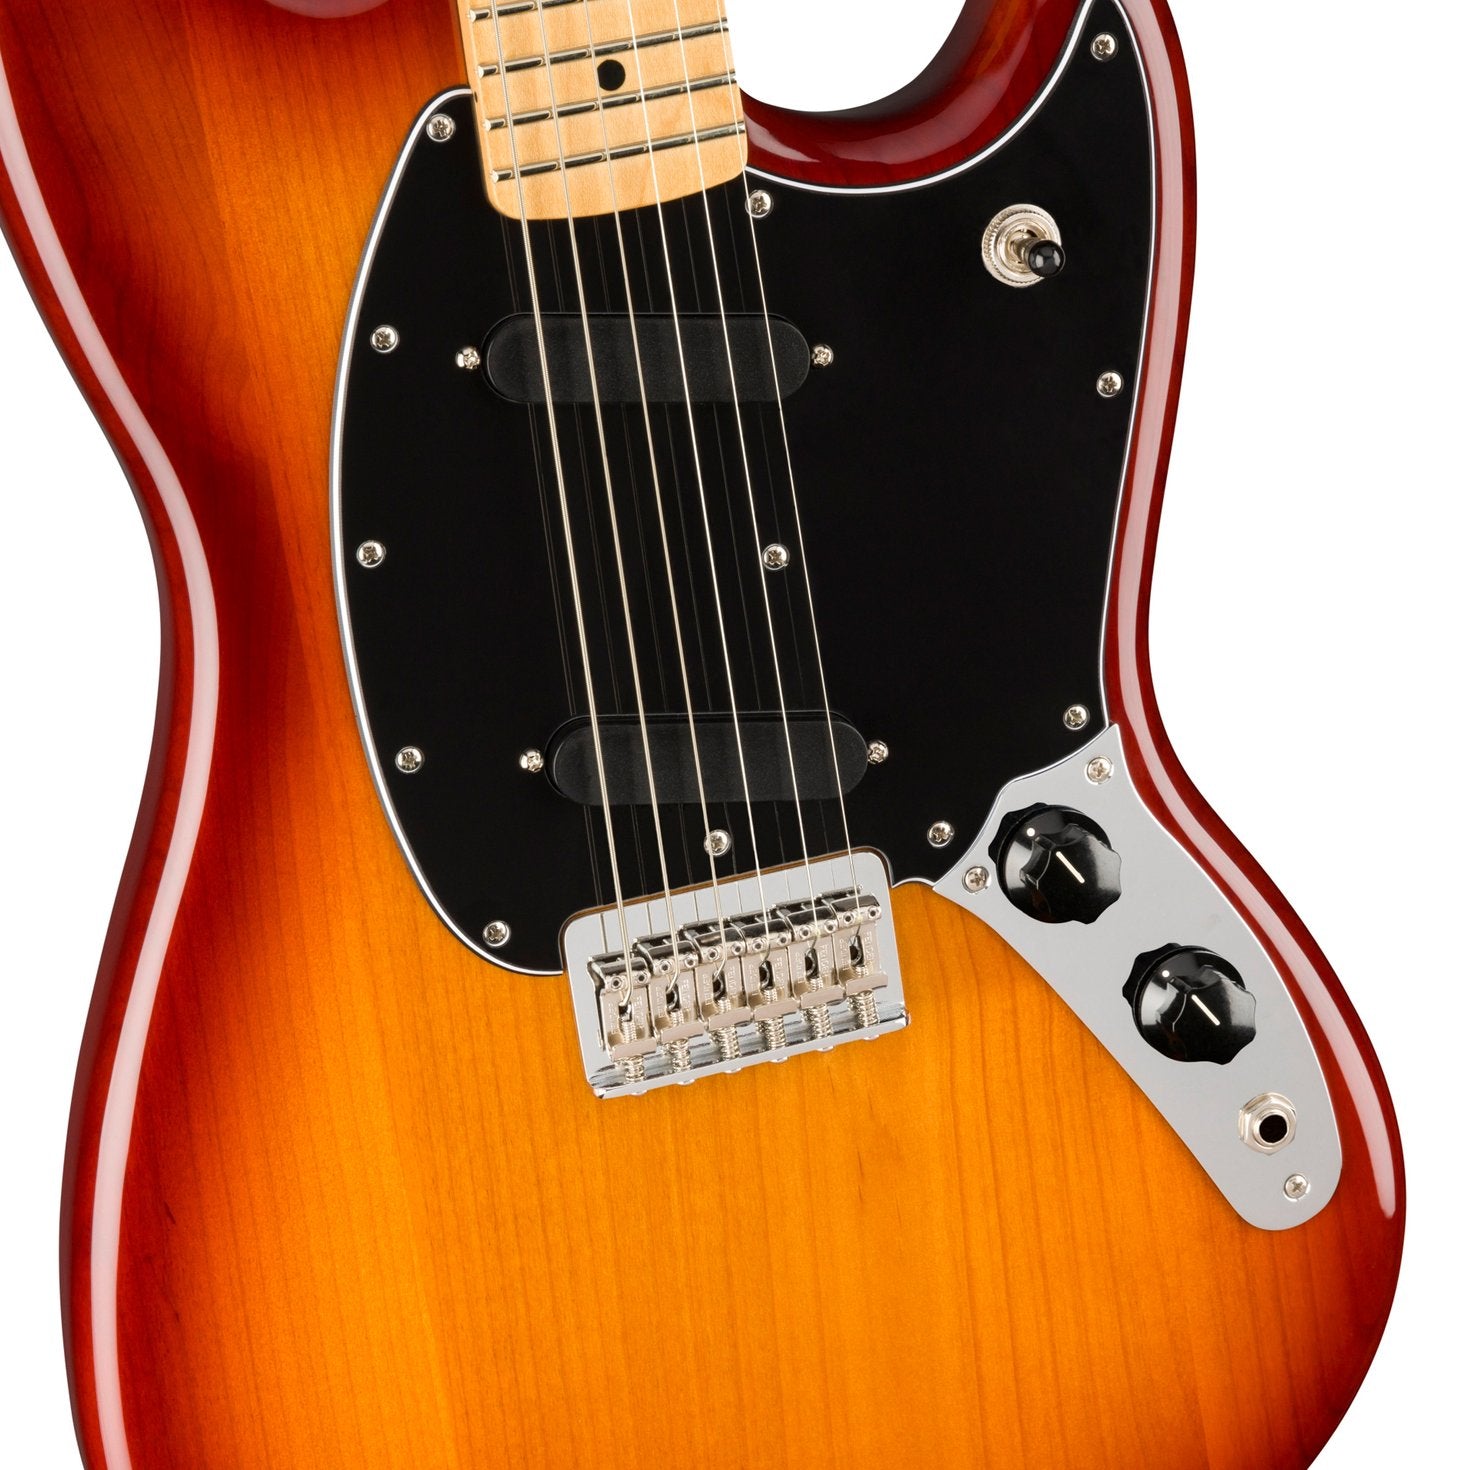 Fender Player Mustang Electric Guitar, Maple FB, Sienna Sunburst, FENDER, ELECTRIC GUITAR, fender-eletric-guitar-f03-014-4042-547, ZOSO MUSIC SDN BHD